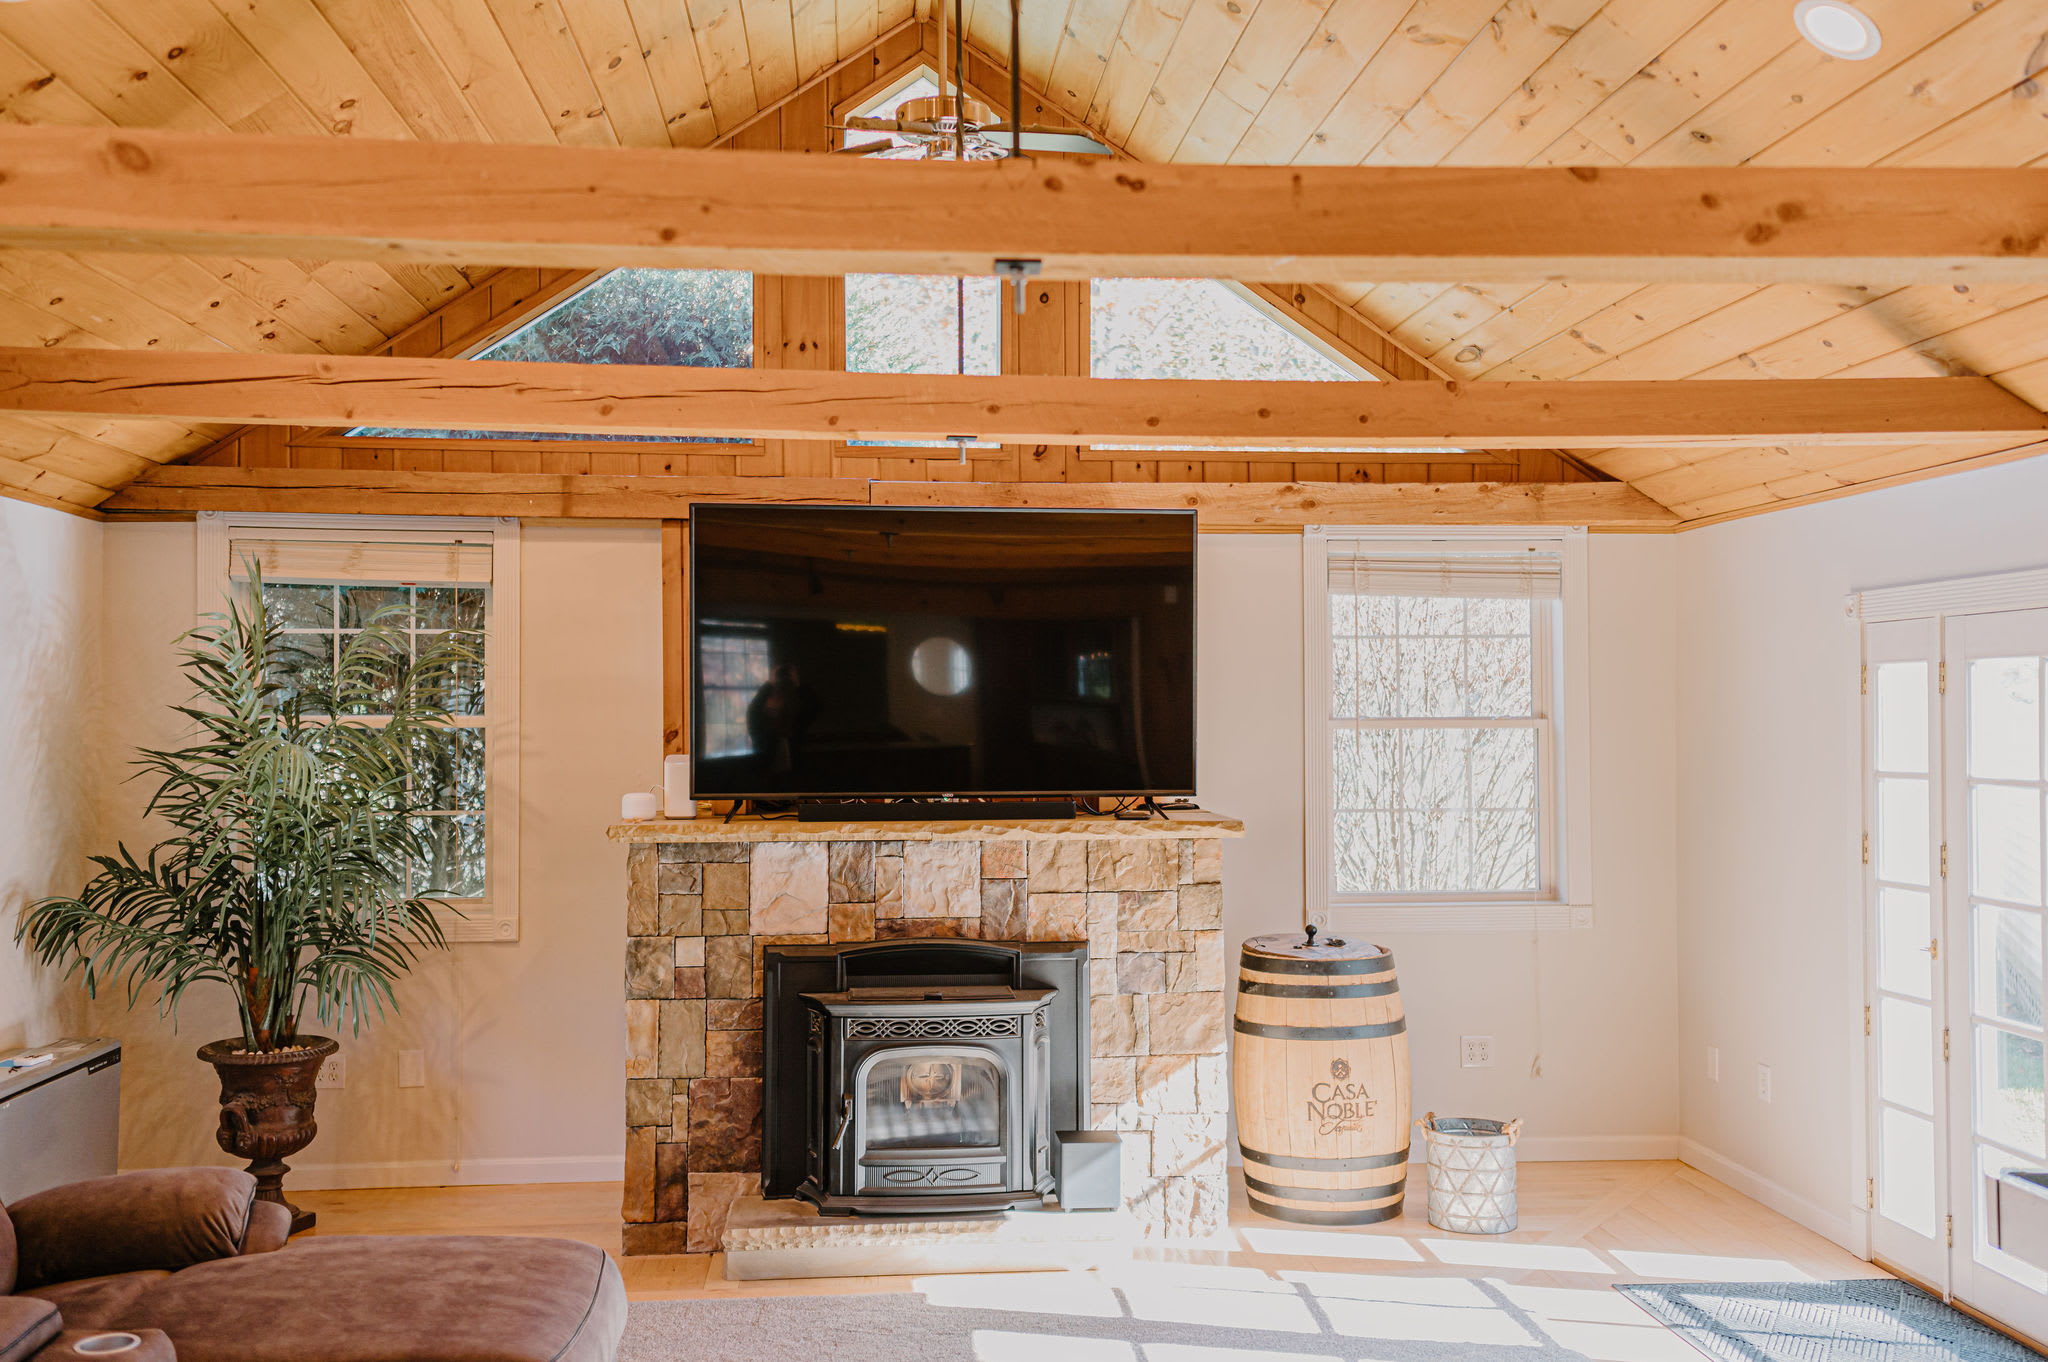 The spacious living room has 15' cathedral ceilings with beautiful wood beams